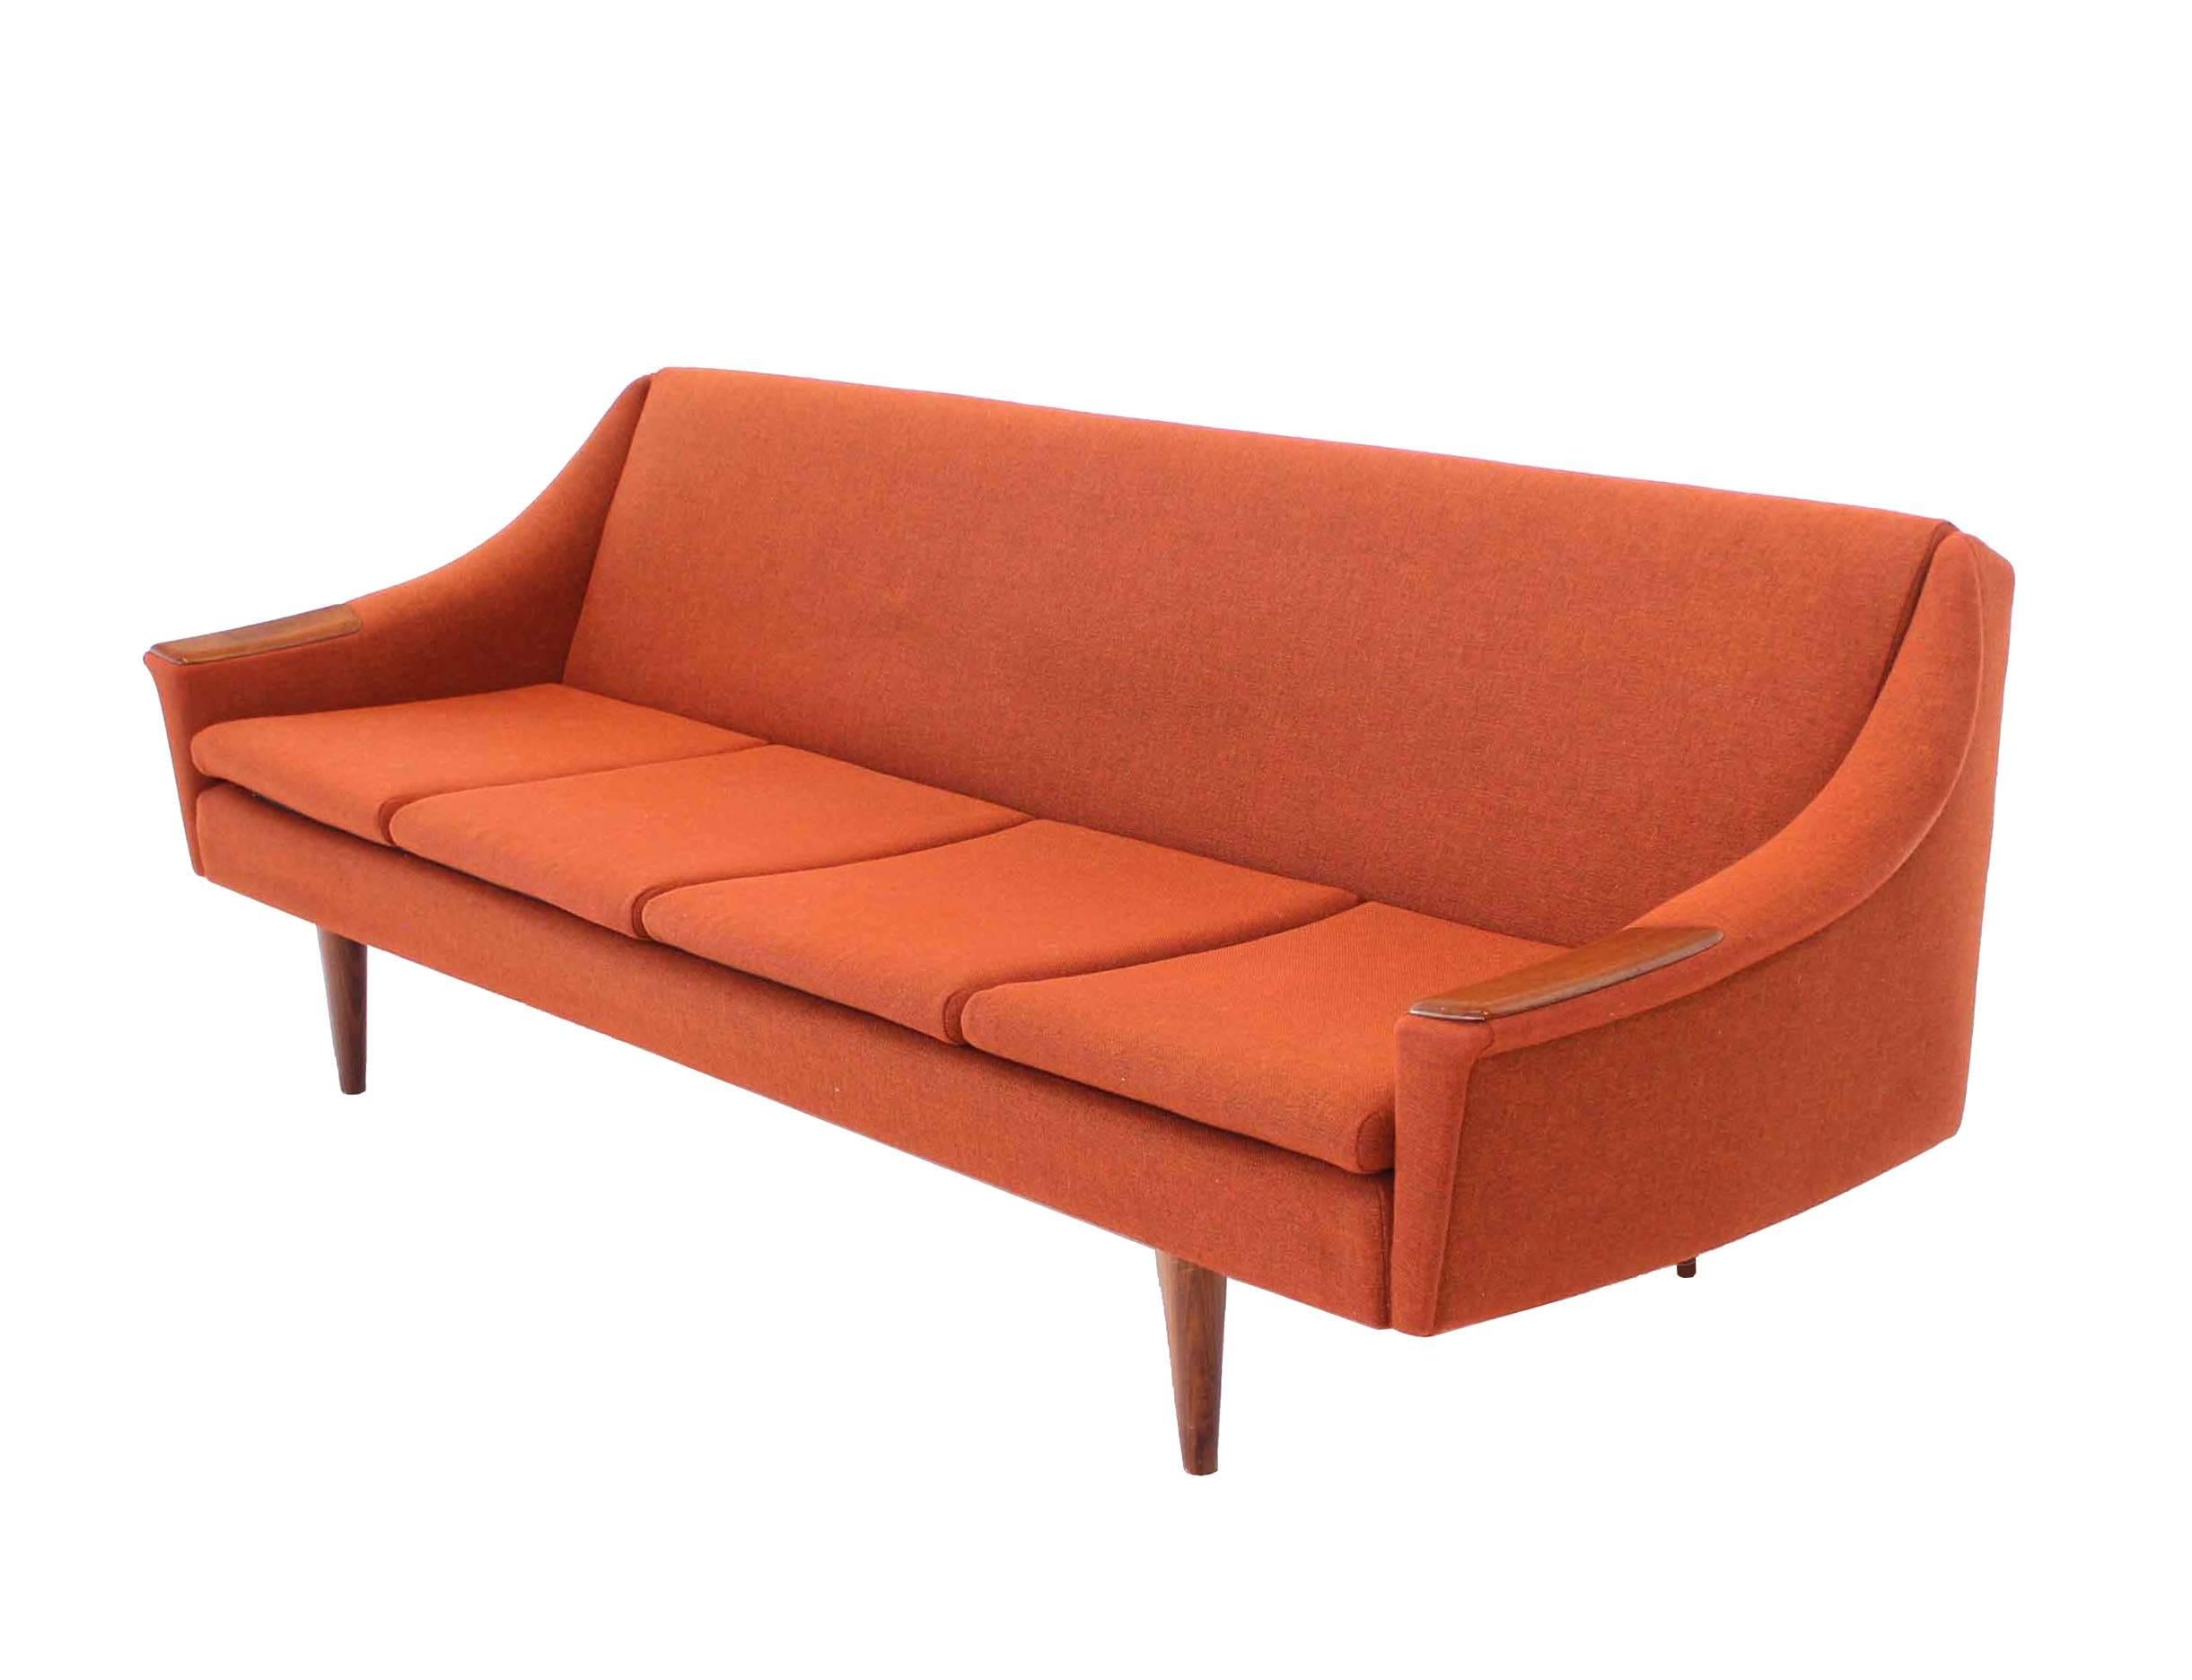 Very nice Danish modern wool upholstery sofa bed with wool upholstery and self unwrapping and winding blanket.